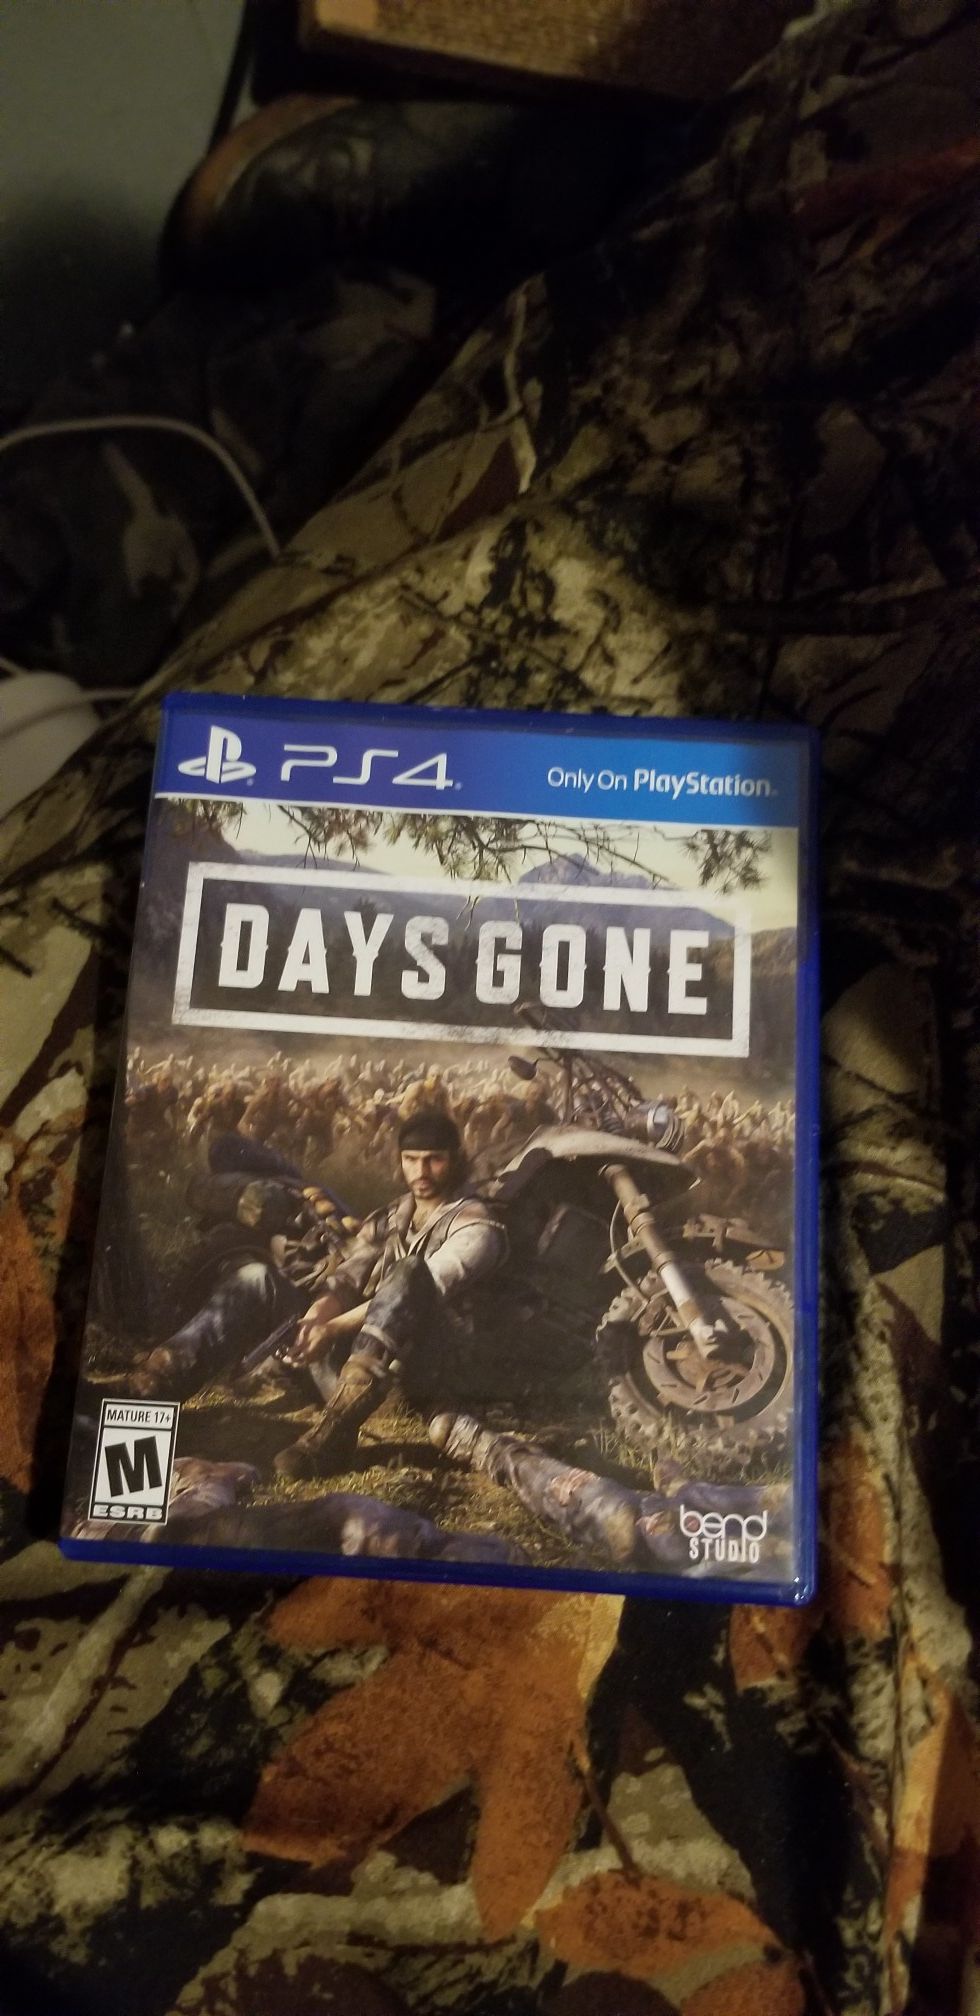 Days gone and kingdom hearts 3 ps4